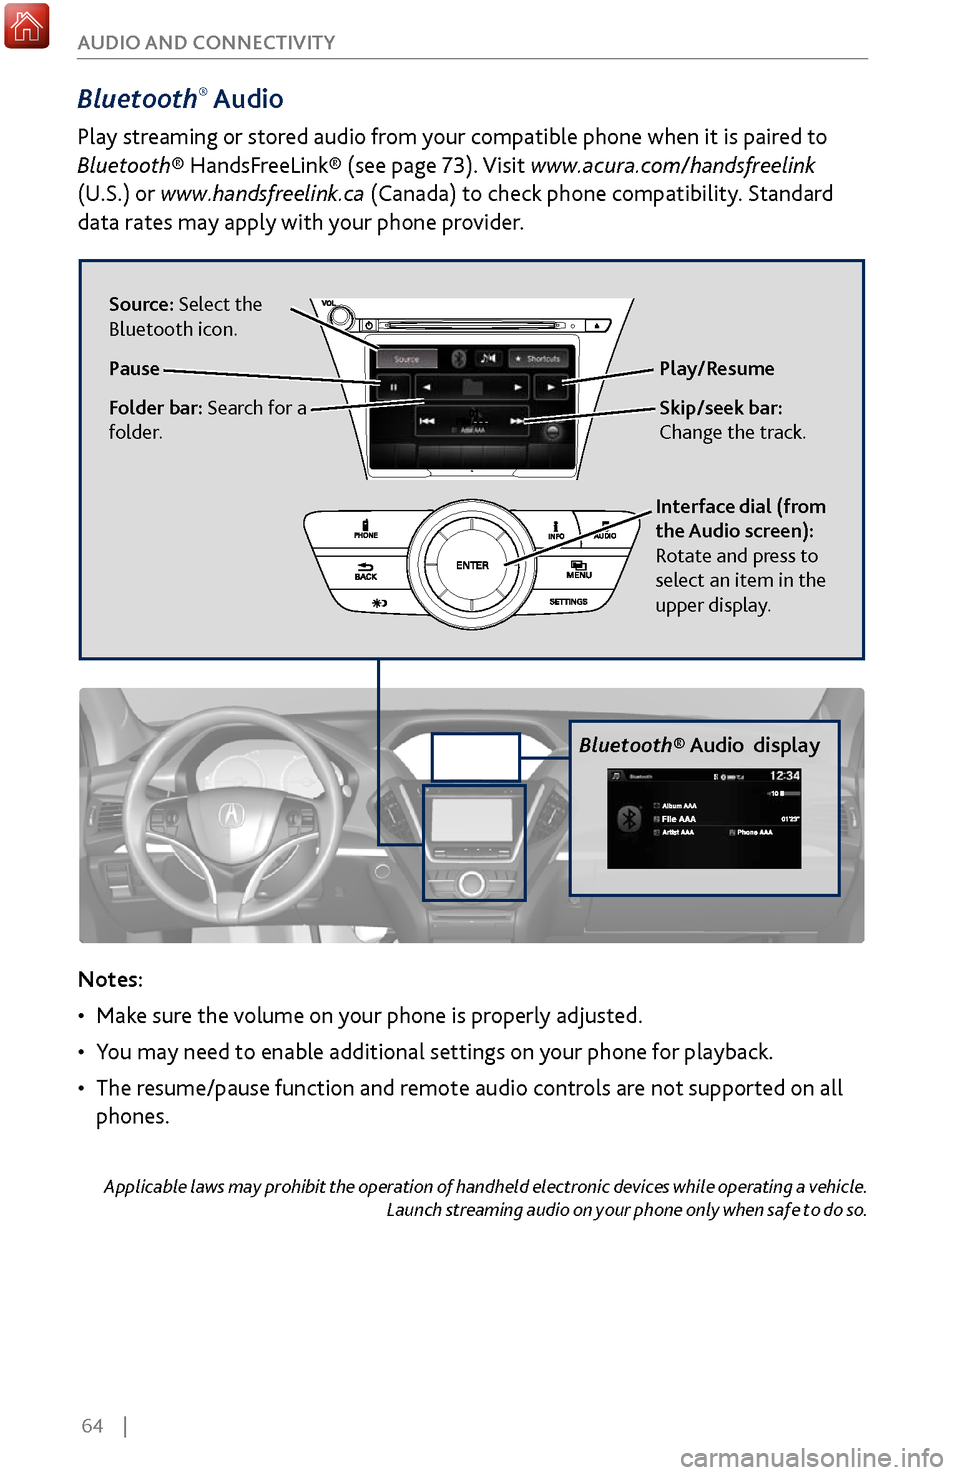 Acura MDX 2017 User Guide 64    |
AUDIO AND CONNECTIVITY
Bluetooth® Audio
Play streaming or stored audio from your compatible phone when it is paired to 
Bluetooth® HandsFreeLink® (see page 73). Visit www.acura.com/handsfre